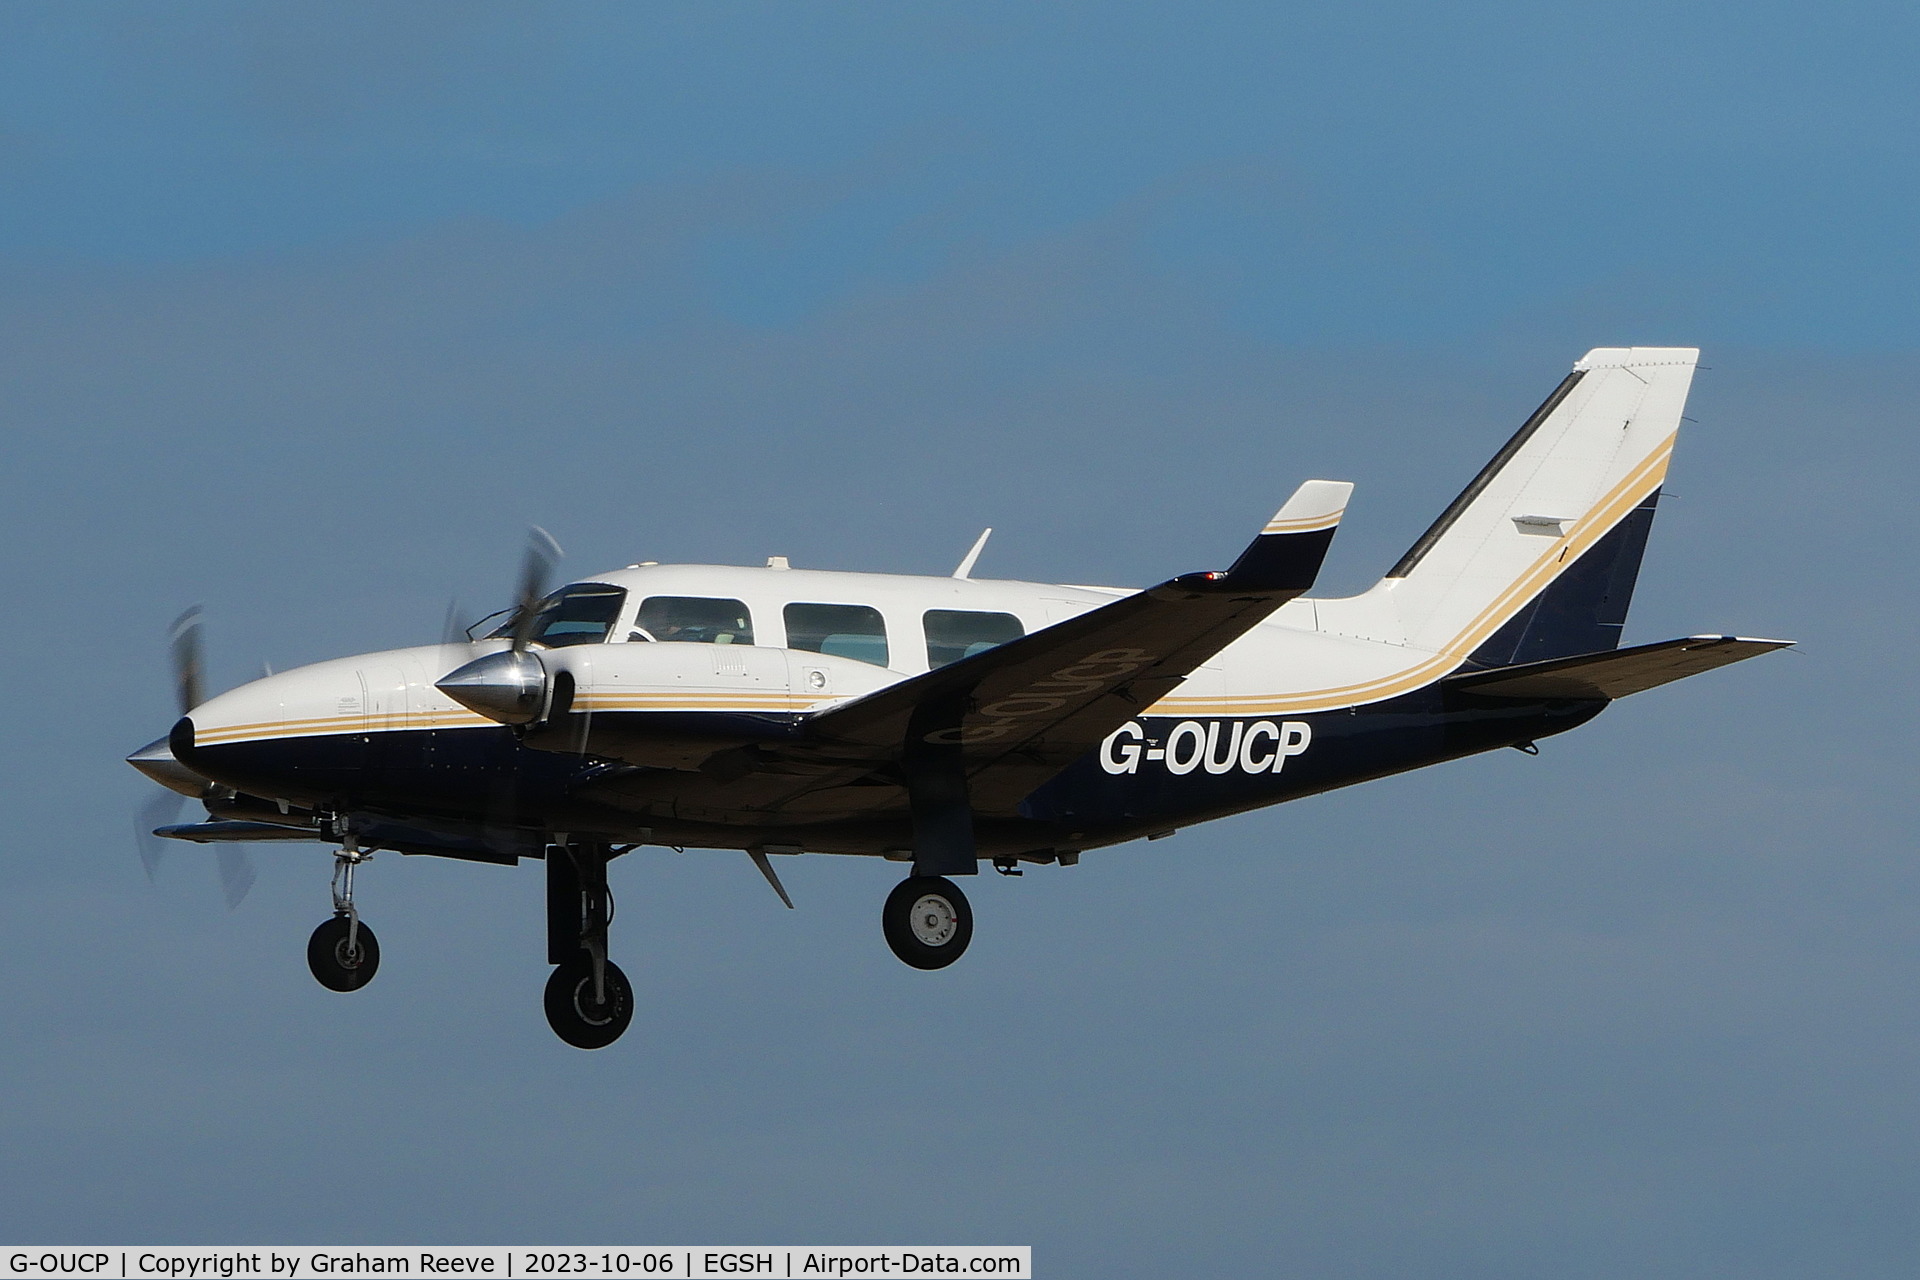 G-OUCP, 1979 Piper PA-31-310 Navajo Navajo C/N 31-7912117, On approach to Norwich.